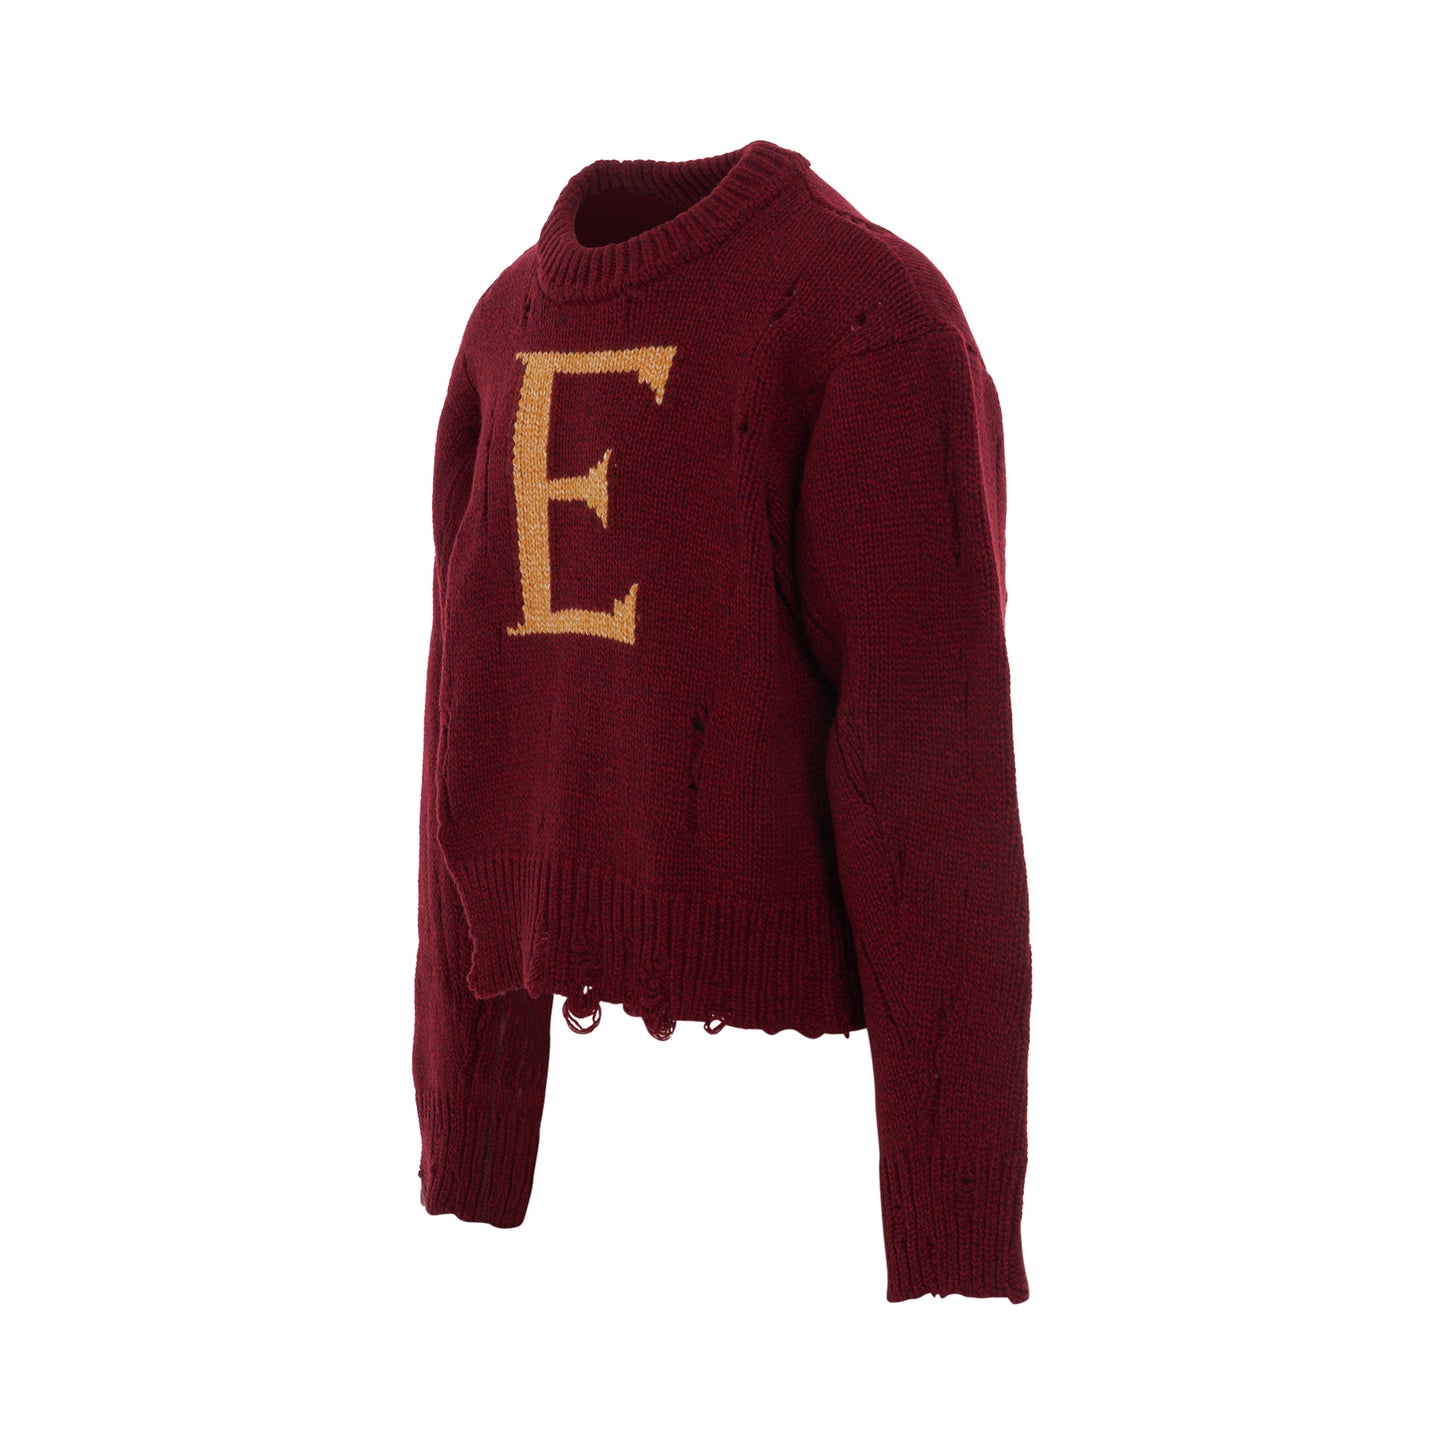 Eronlab Knit Sweater in Red